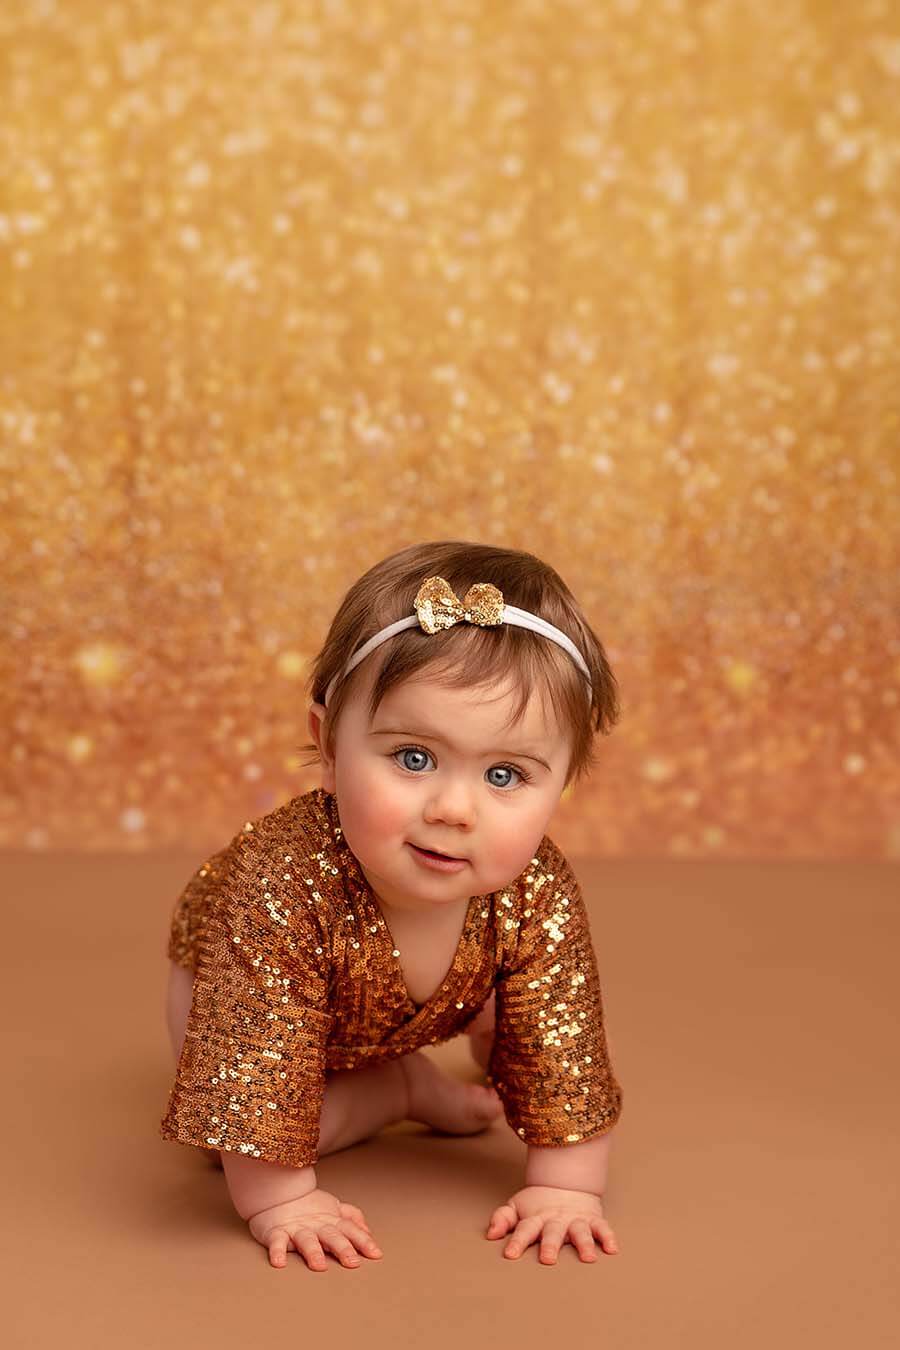 A baby girl is crawling on the floor. She is wearing a cute baby romper with gold sequins on it. she has a matching gold bow in her hair. The background has gold glitters.\